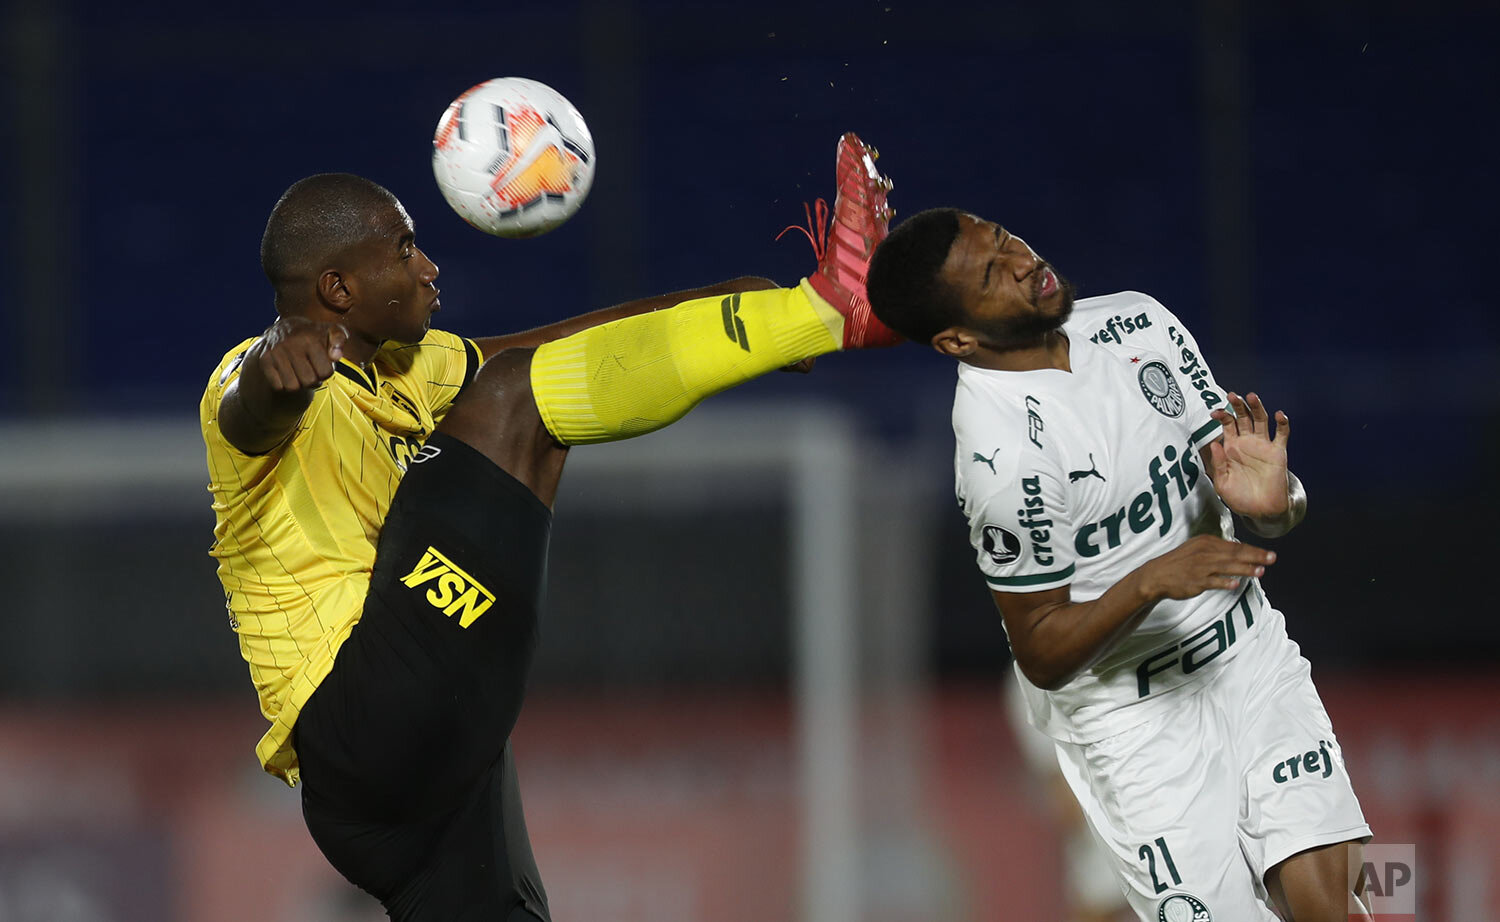  Wesley of Brazil's Palmeiras, right, and Jhohan Romana of Paraguay's Guarani battle for the ball at a Copa Libertadores soccer match in Asuncion, Paraguay, Sept. 23, 2020. (AP Photo/Jorge Saenz, Pool) 